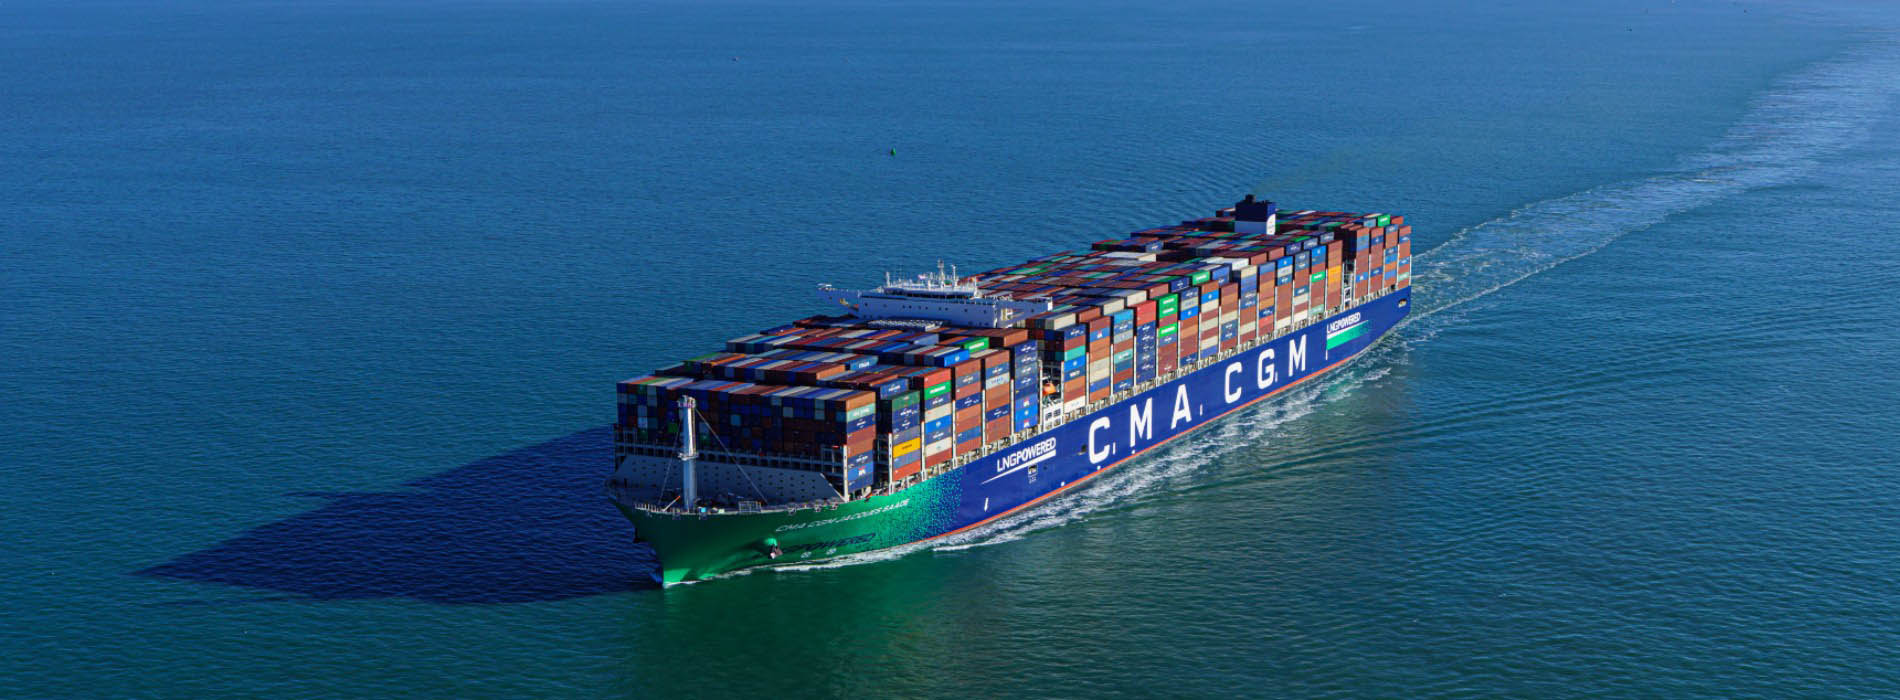 Vessel Jacques Saade owned by CMA CGM